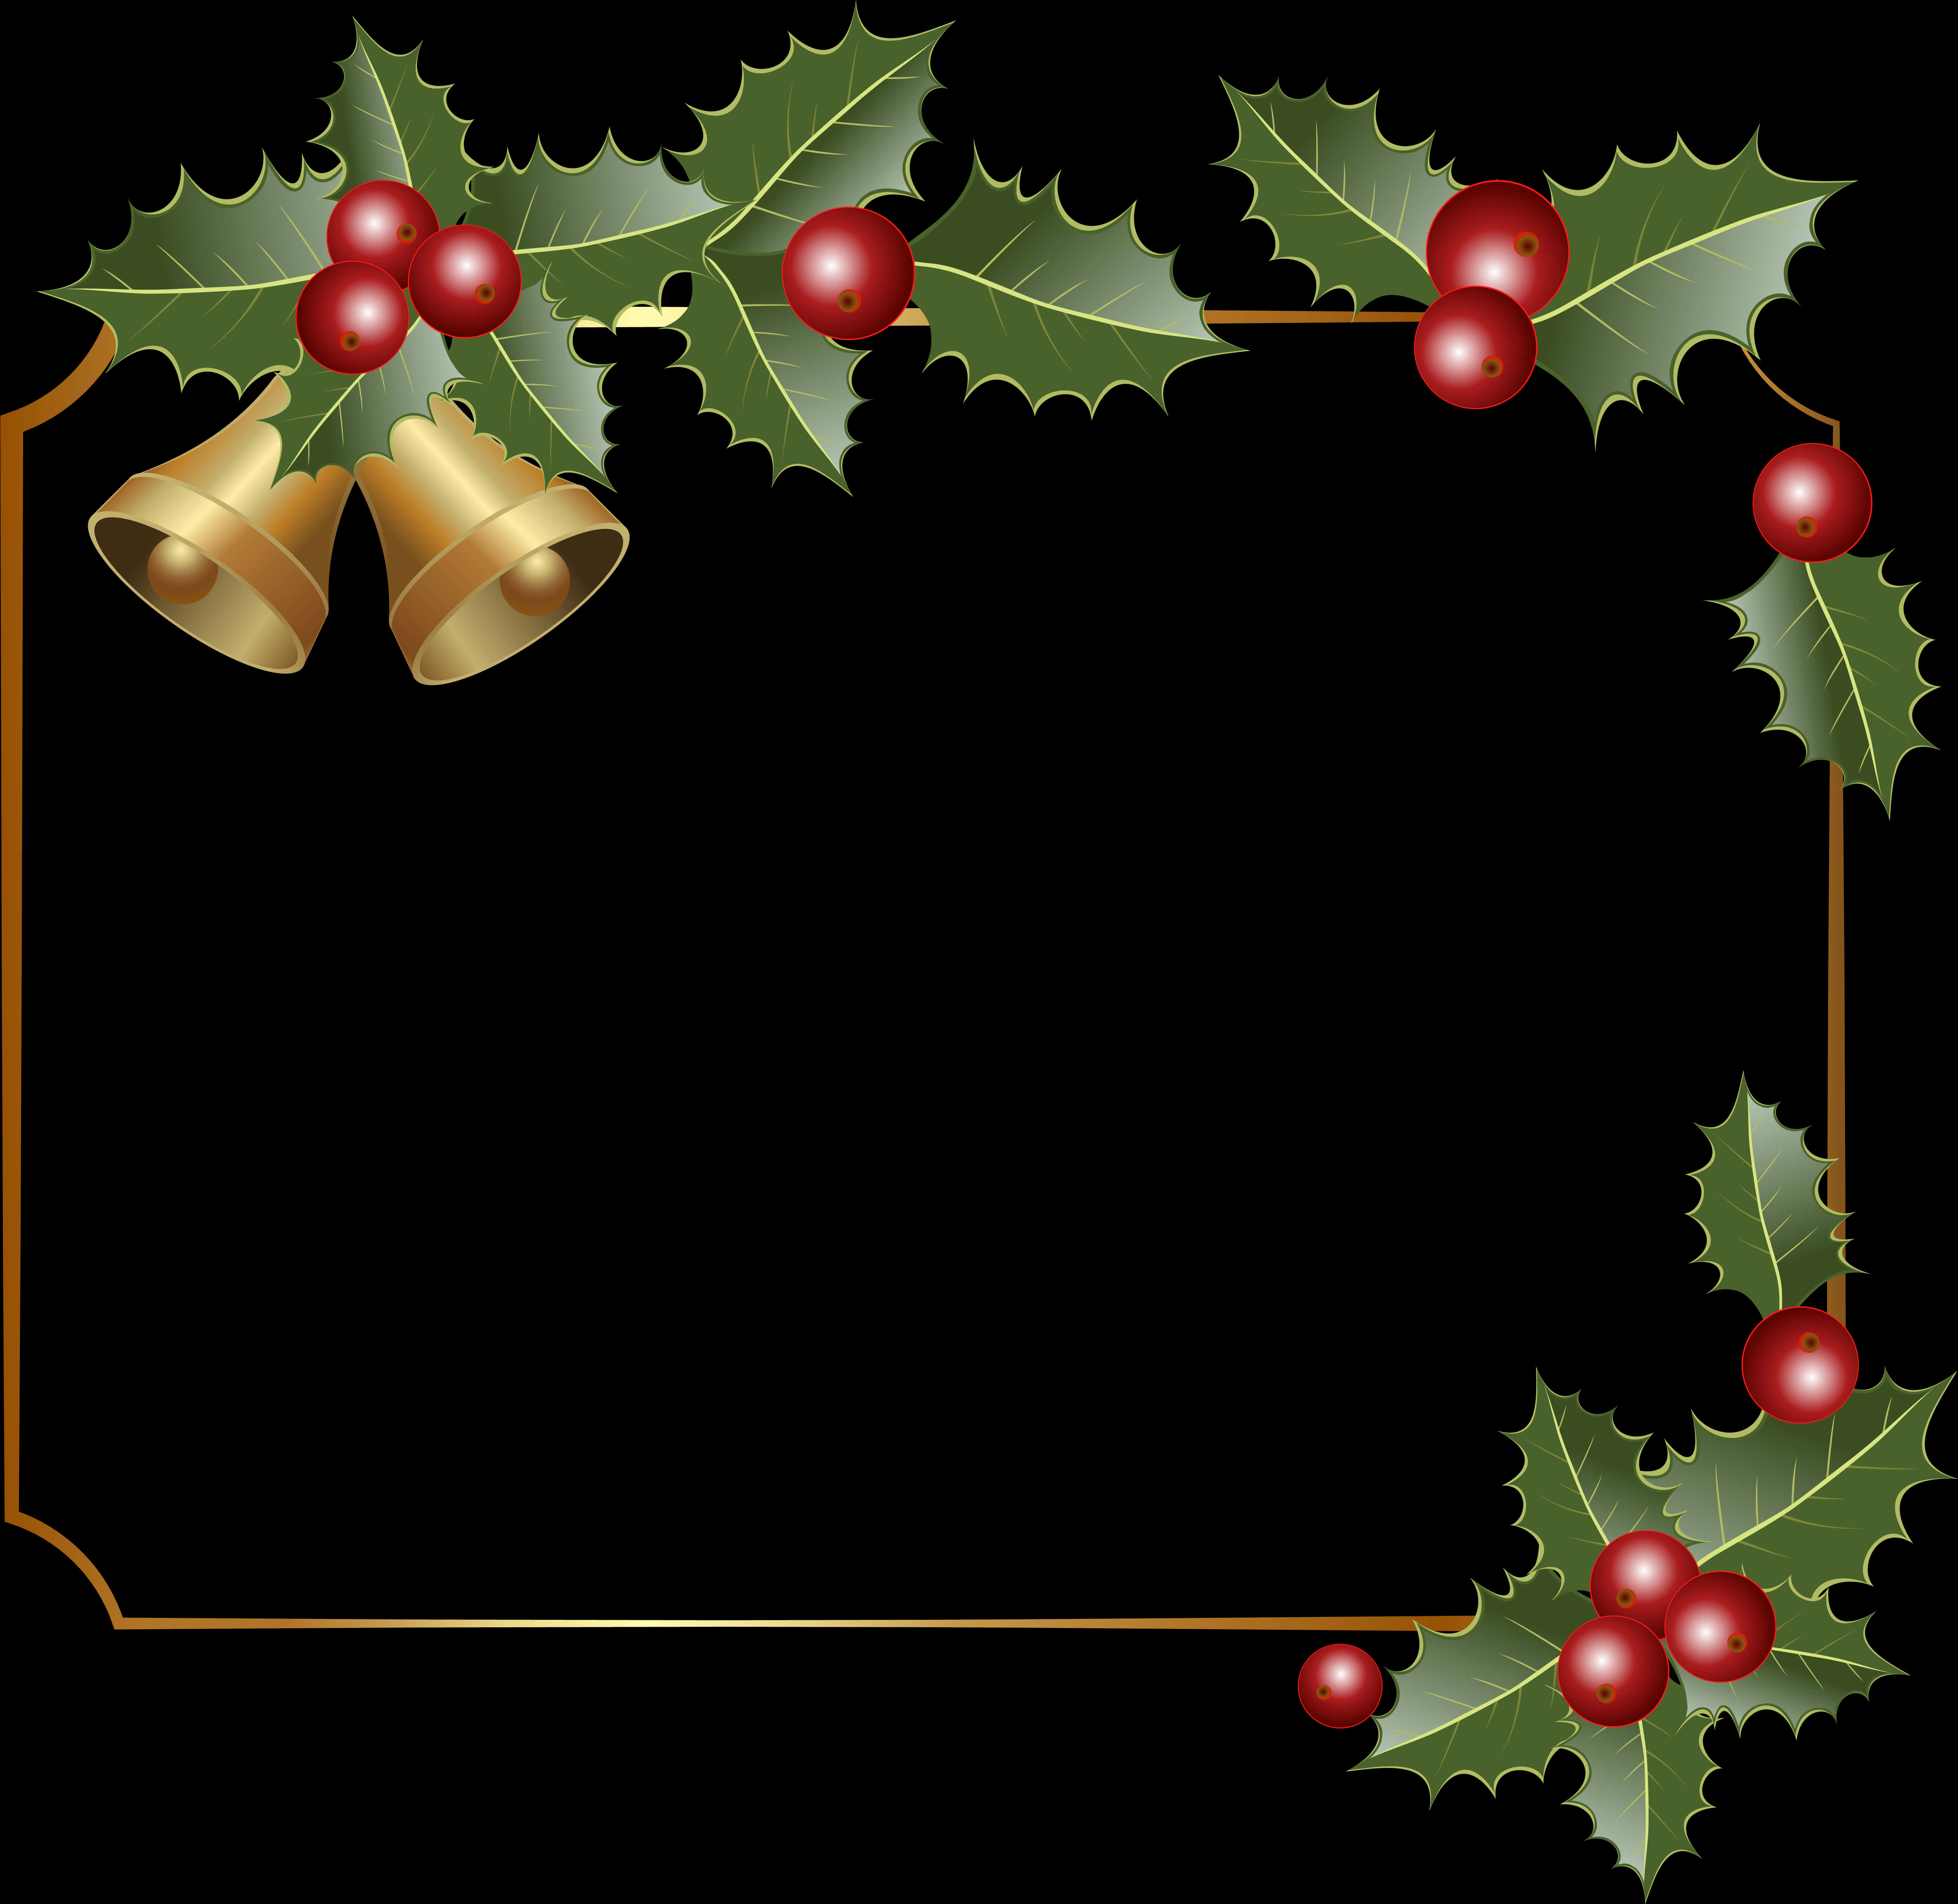 A Gold Frame With Holly Berries And Bells